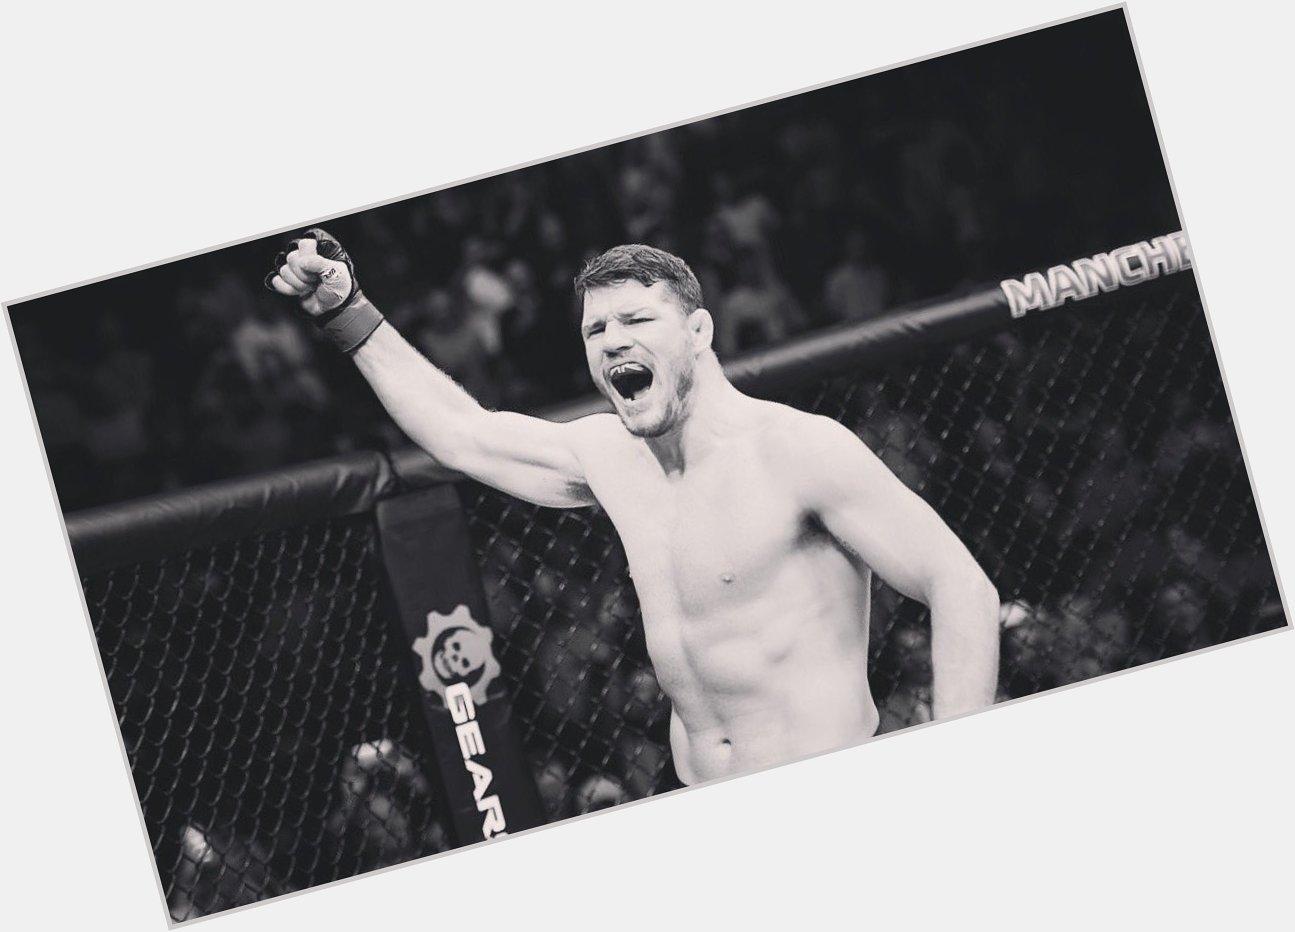 For years, people wrote this man off. He came back and proved them wrong.

Happy birthday to Michael Bisping 